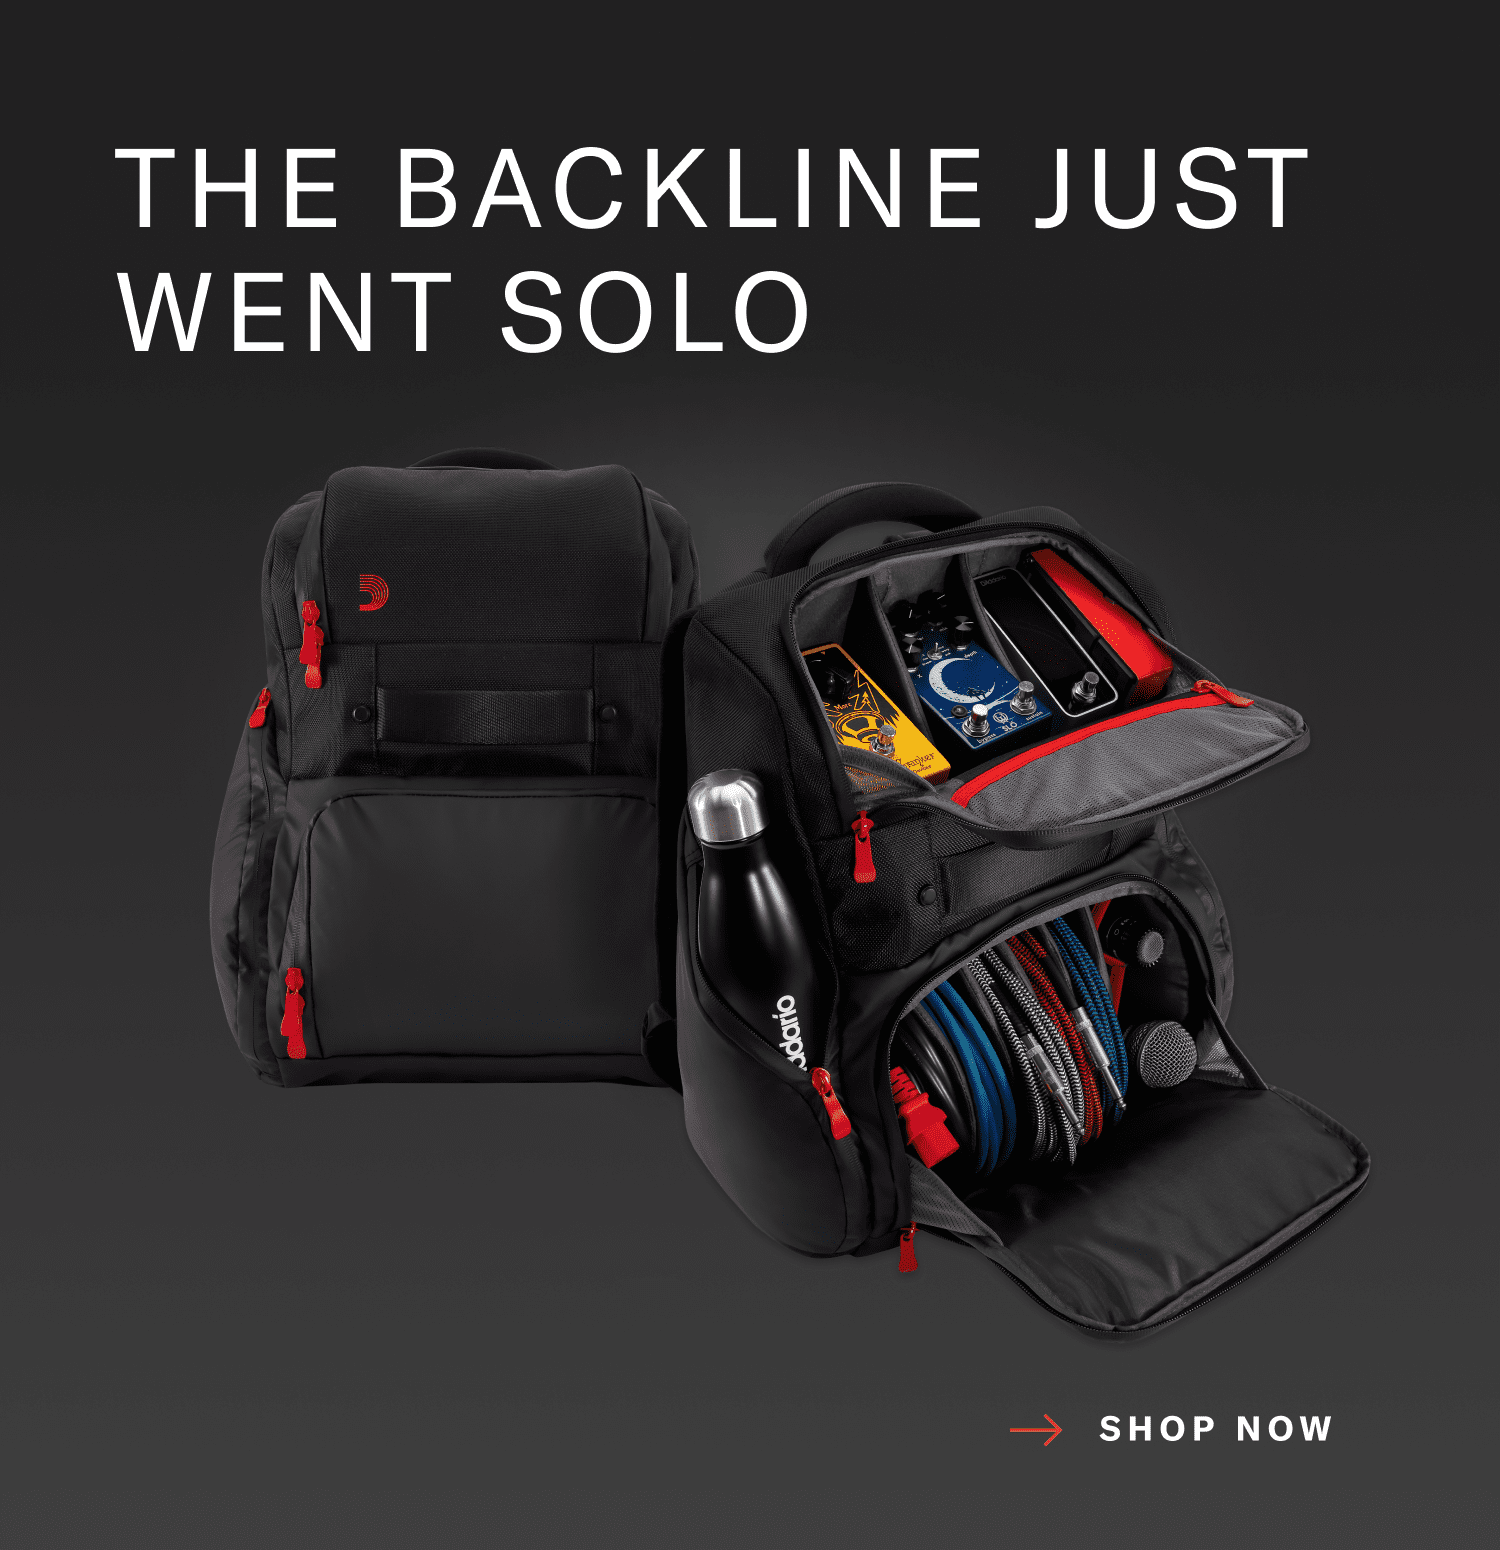 Gear Backpack - The Backline just went solo